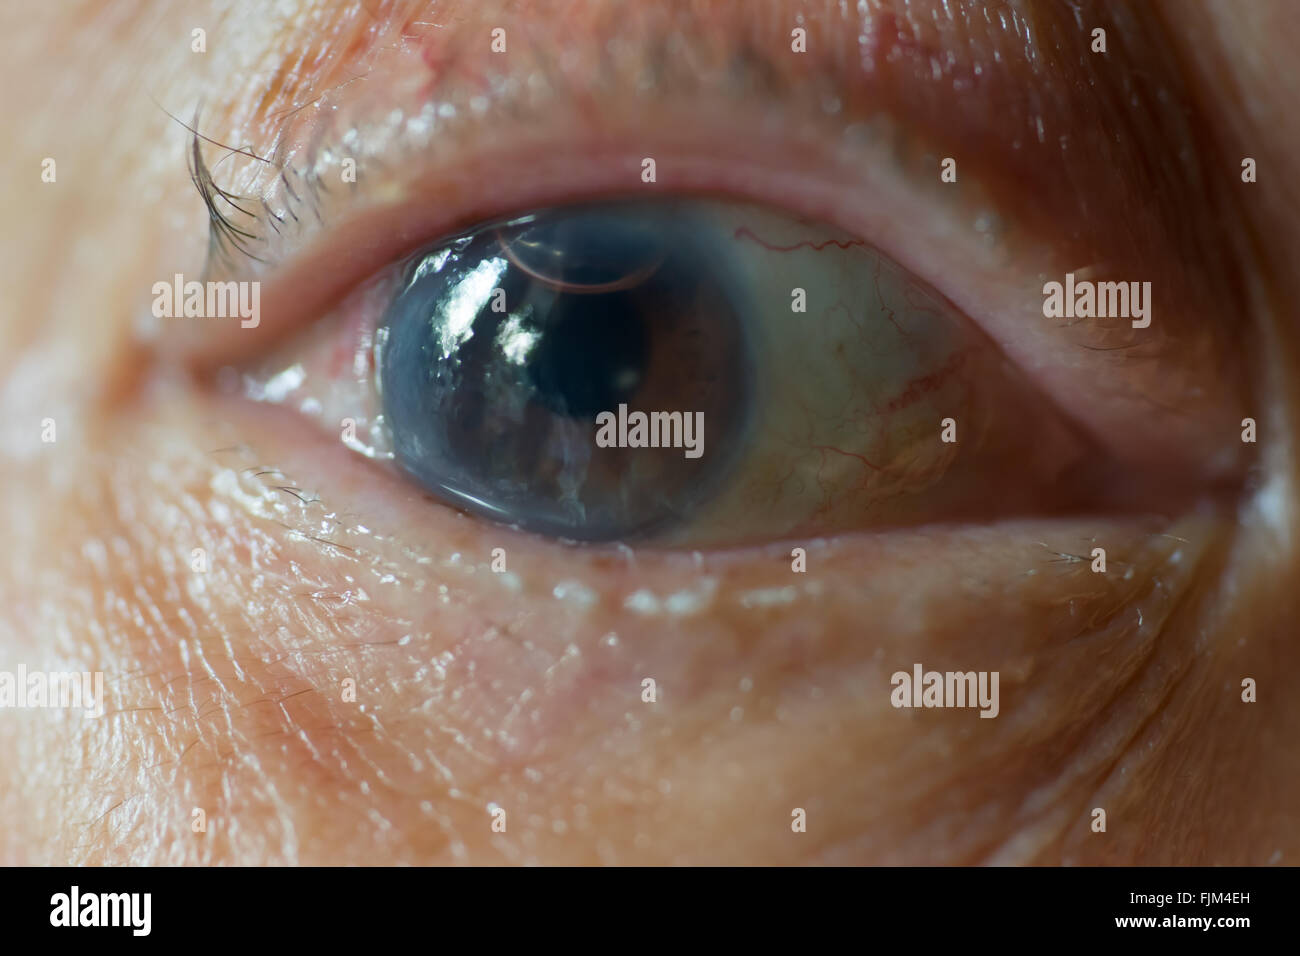 Old man's eye with trace of cornea surgical operation and air bubble Stock Photo